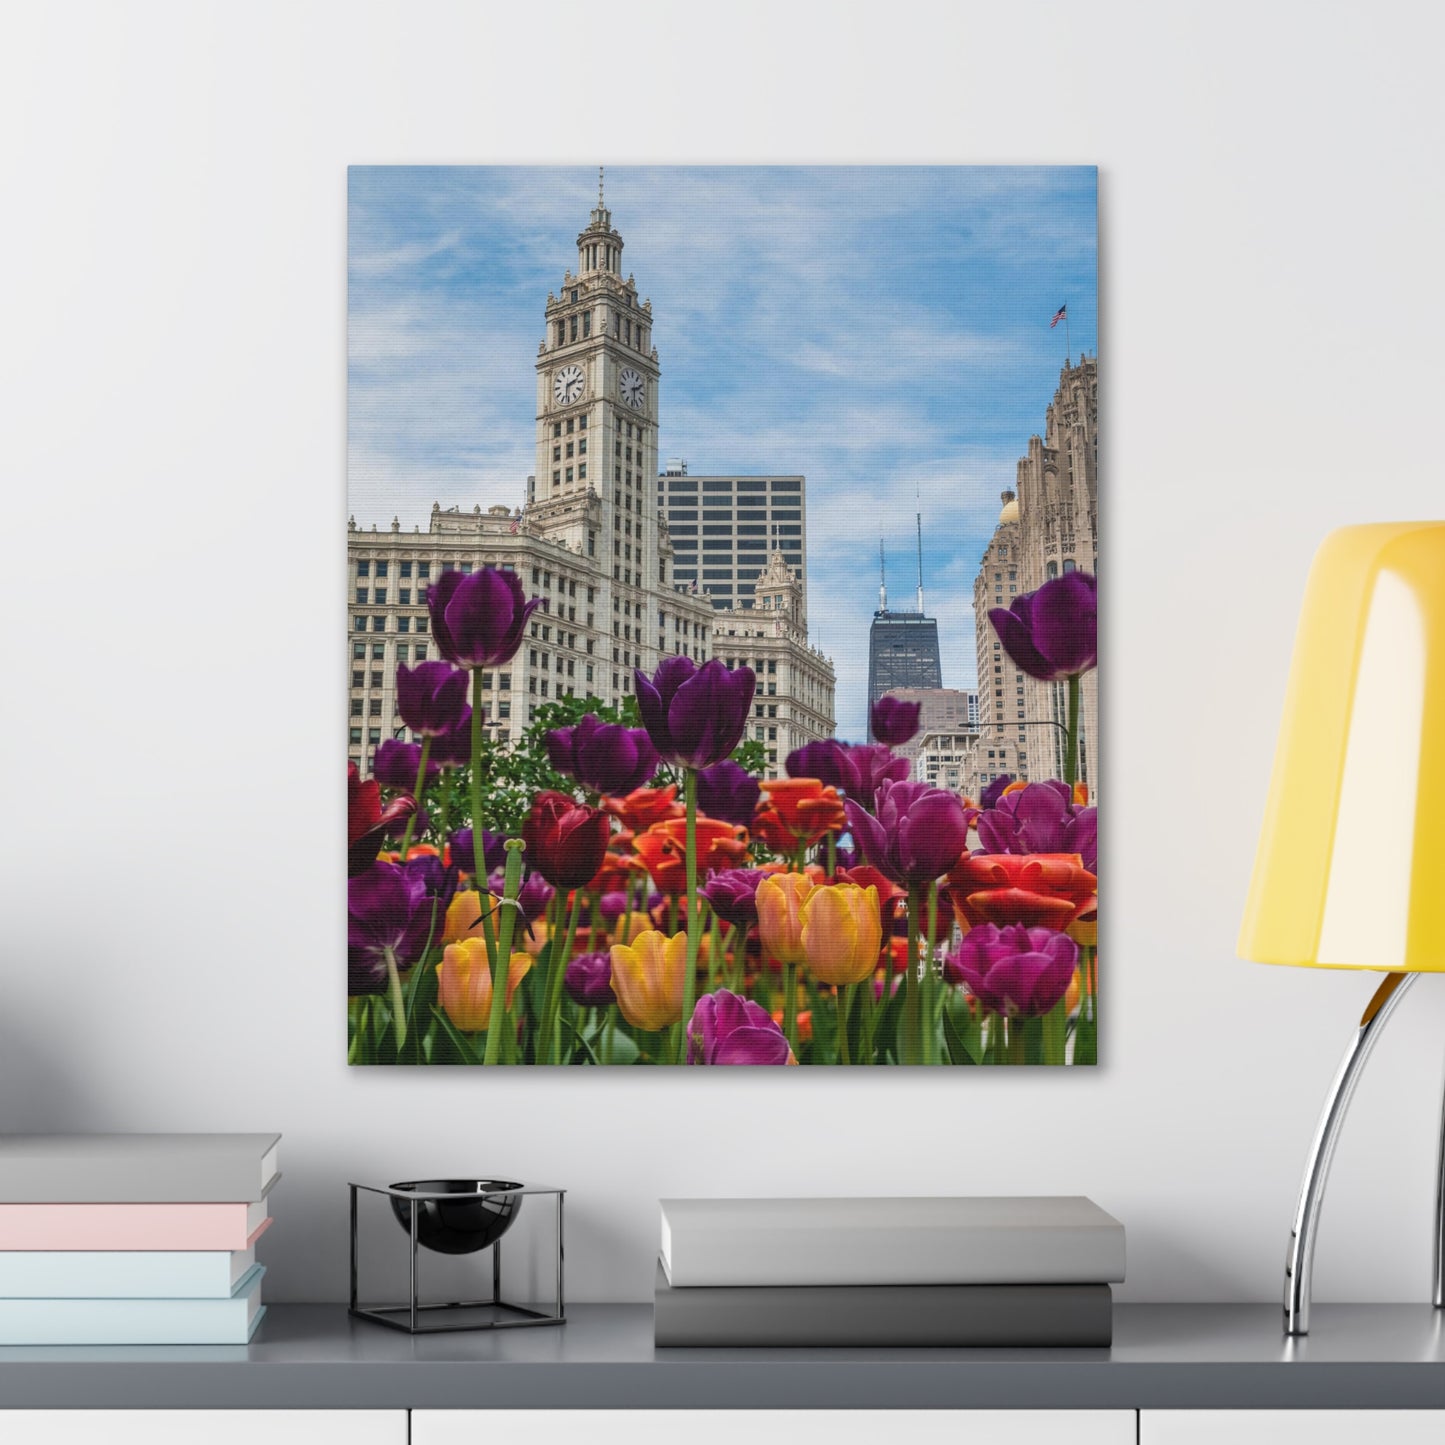 Wrigley Building with Spring Tulips, Chicago - Canvas Wall Print (Free Shipping)